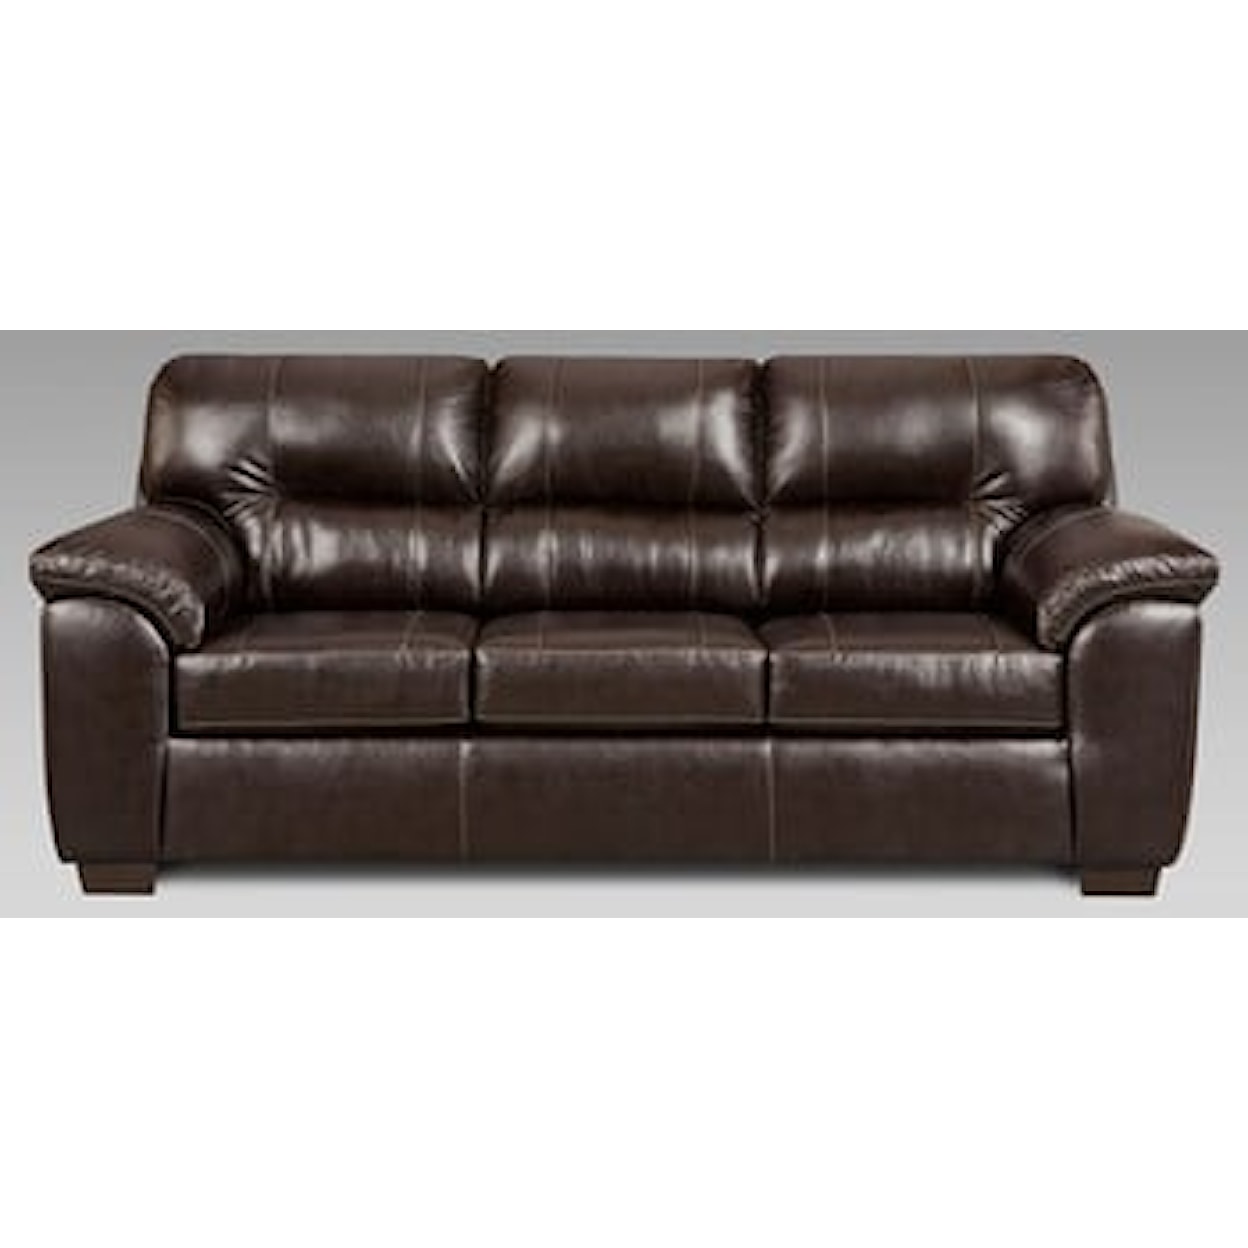 Affordable Furniture Easton EASTON CHOCOLATE QUEEN SLEEPER |